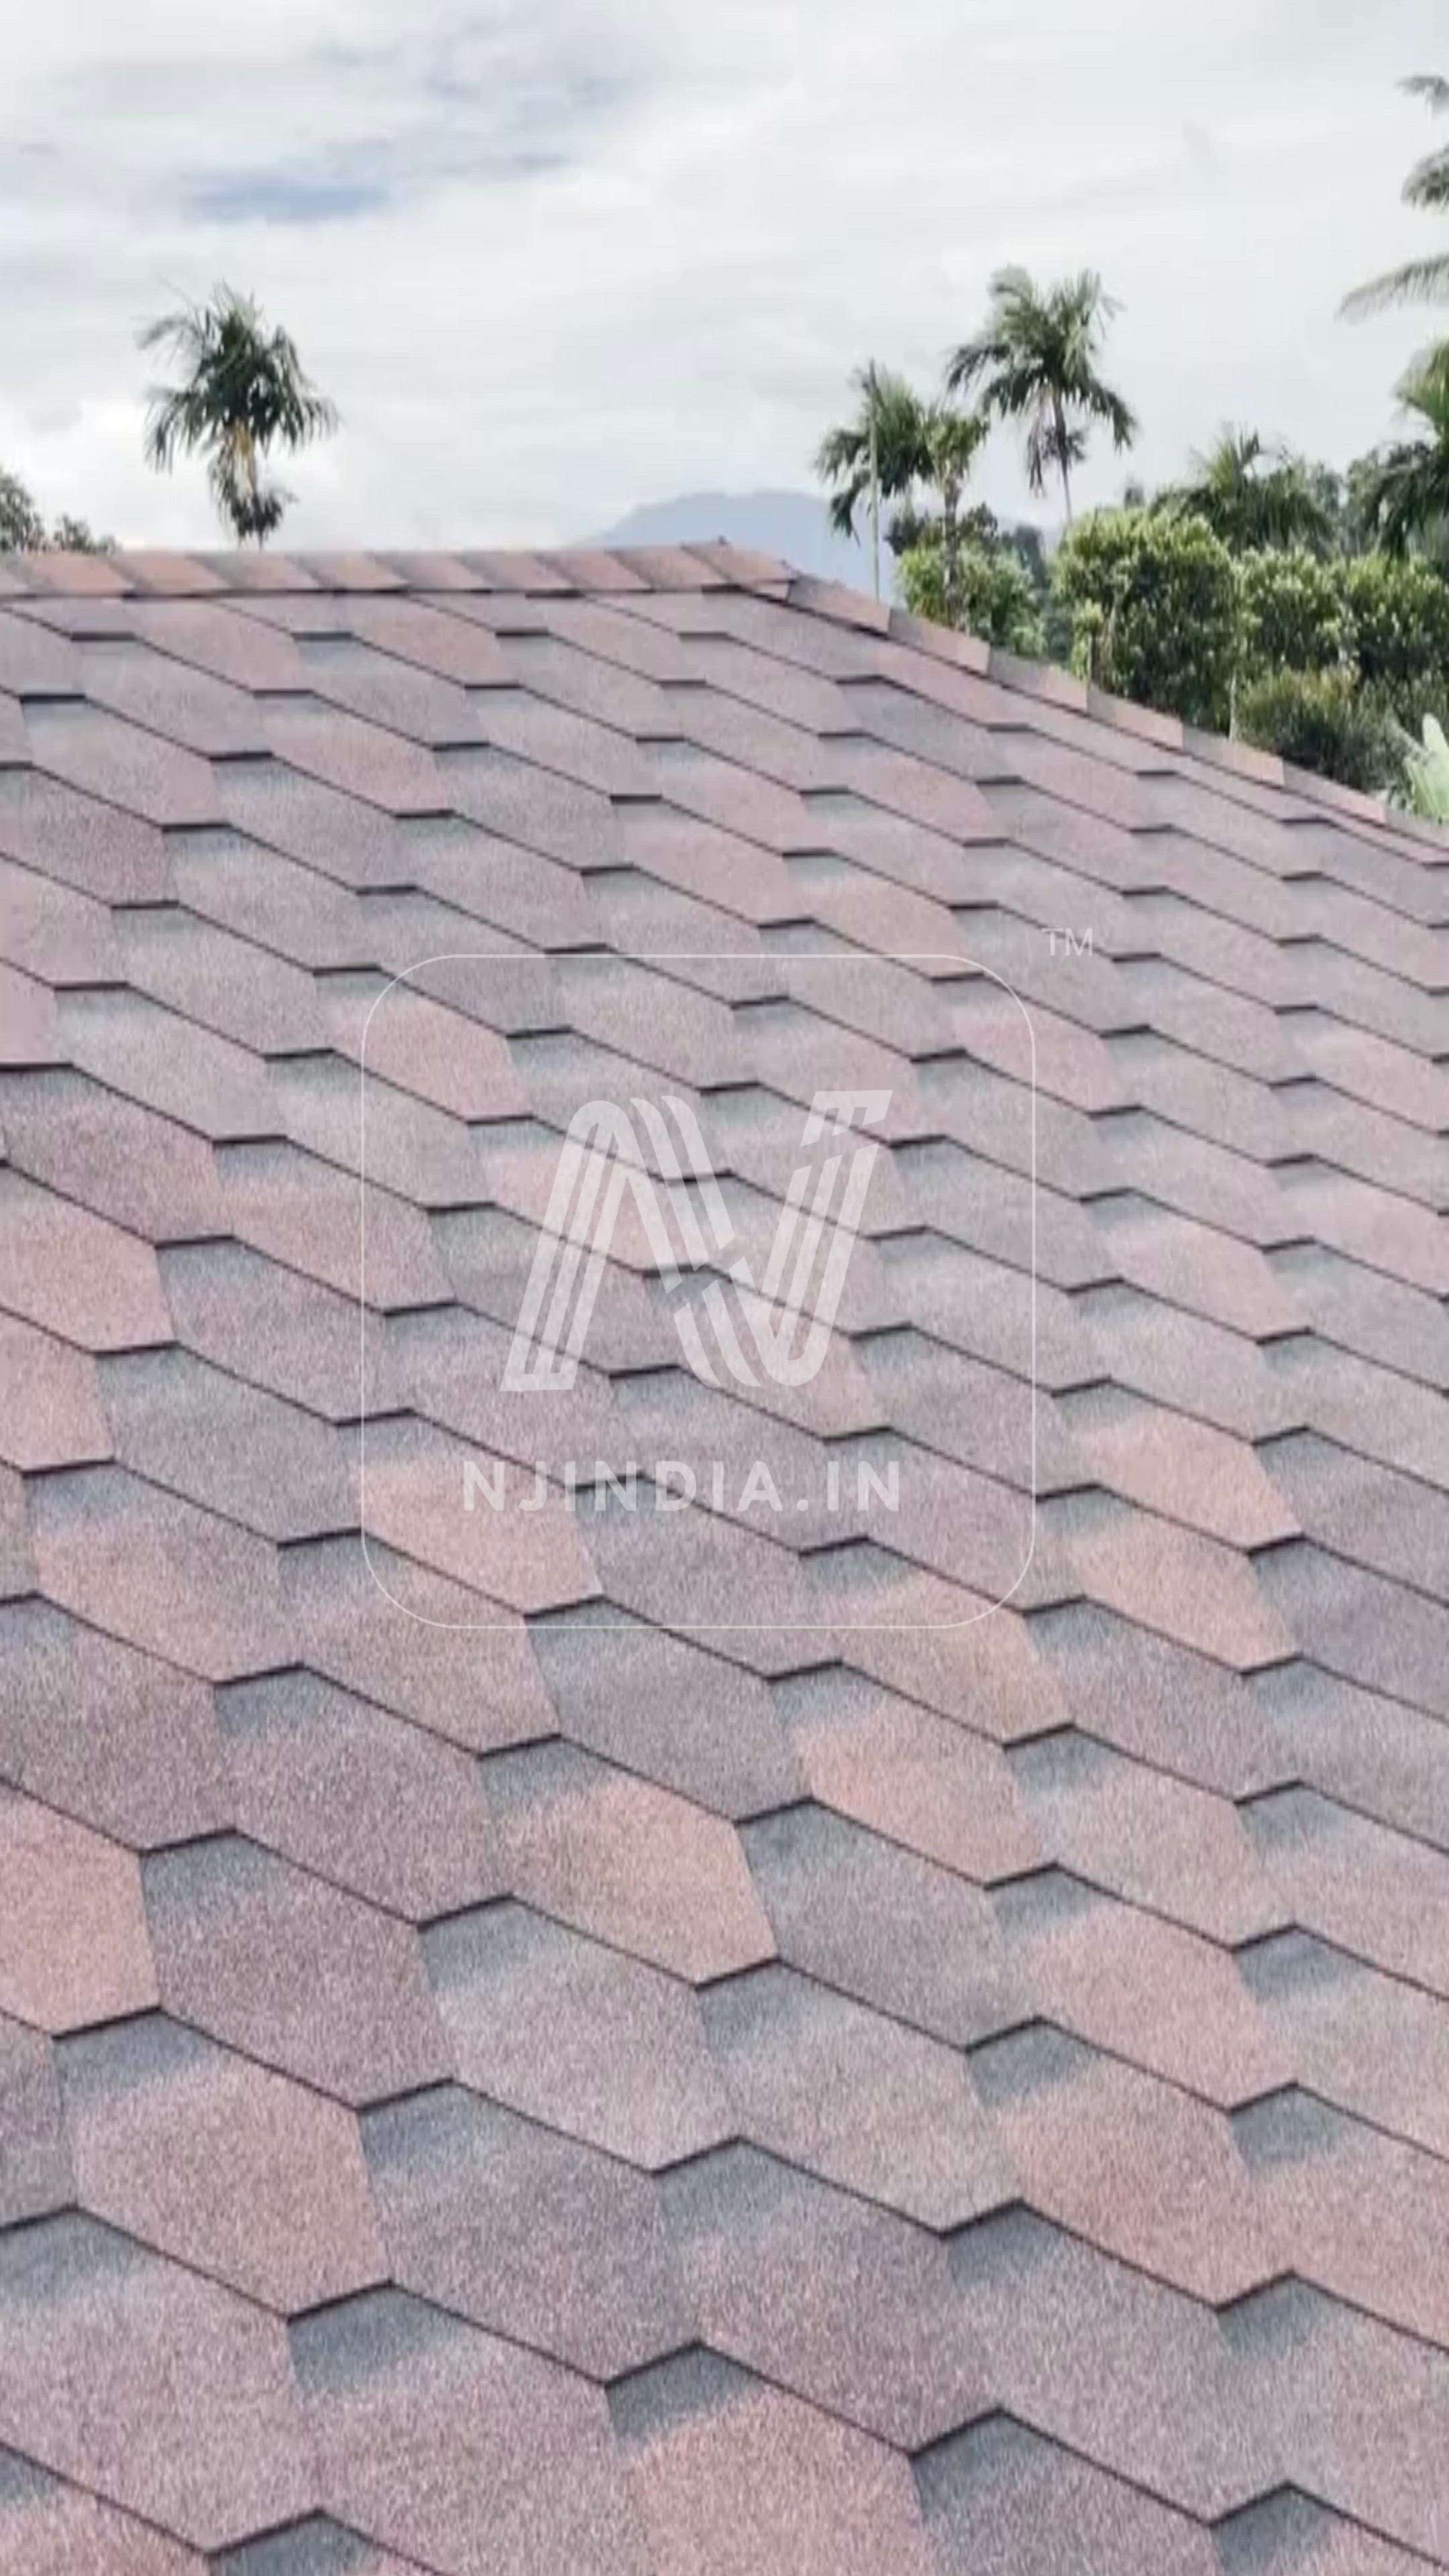 work completed🏡@ Padinjarathara your complete roofing solution 🌐www.njindia. in 📞+919778690849, +91813683233 #RoofingShingles  #RoofingIdeas #RoofingDesigns  #bestrooftilesinkerala  #roofingcompany  #roofingdealer  #roofingcontractor  #koloapp  #kolopost